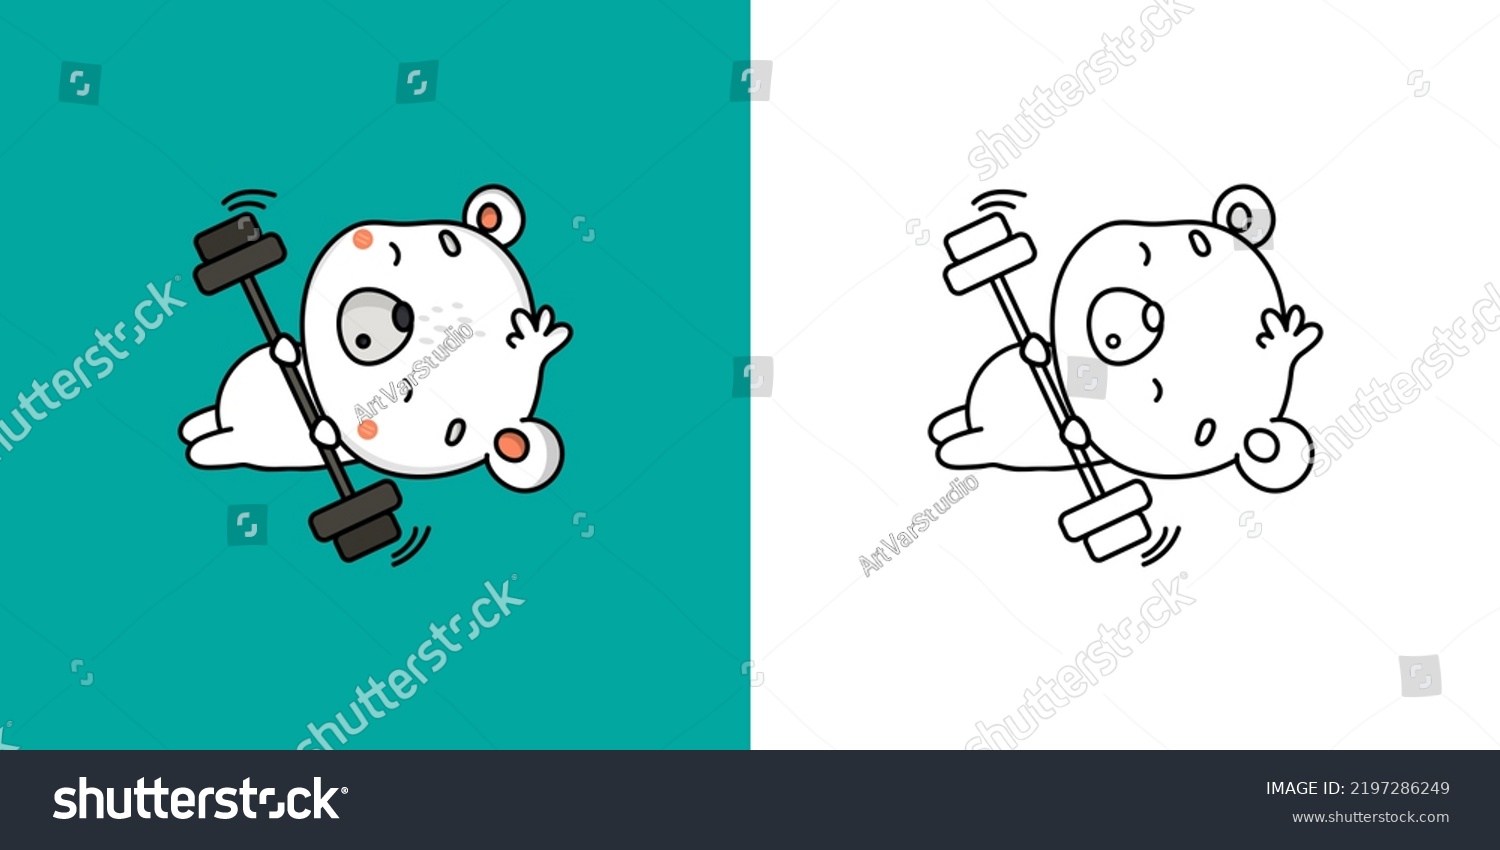 SVG of Kawaii Clipart Polar Bear Sportsman Illustration and For Coloring Page. Funny Bear Sportsman. Vector Illustration of a Kawaii Animal for Stickers, Baby Shower, Coloring Pages, Prints for Clothes.
 svg